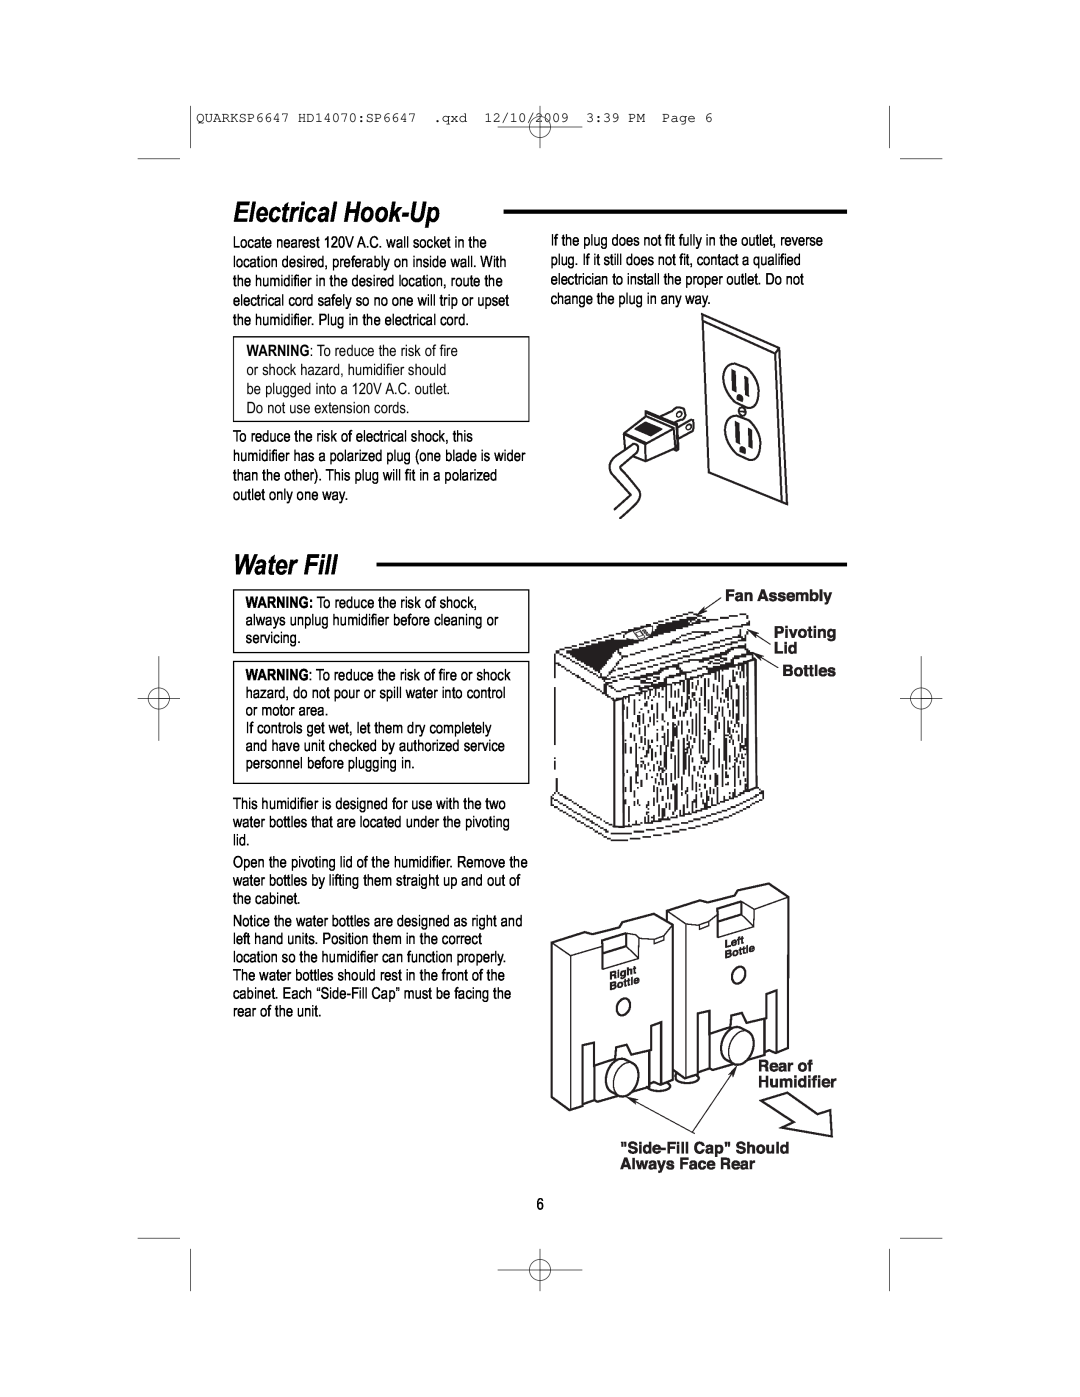 MoistAir HD14070 owner manual Electrical Hook-Up, Water Fill 